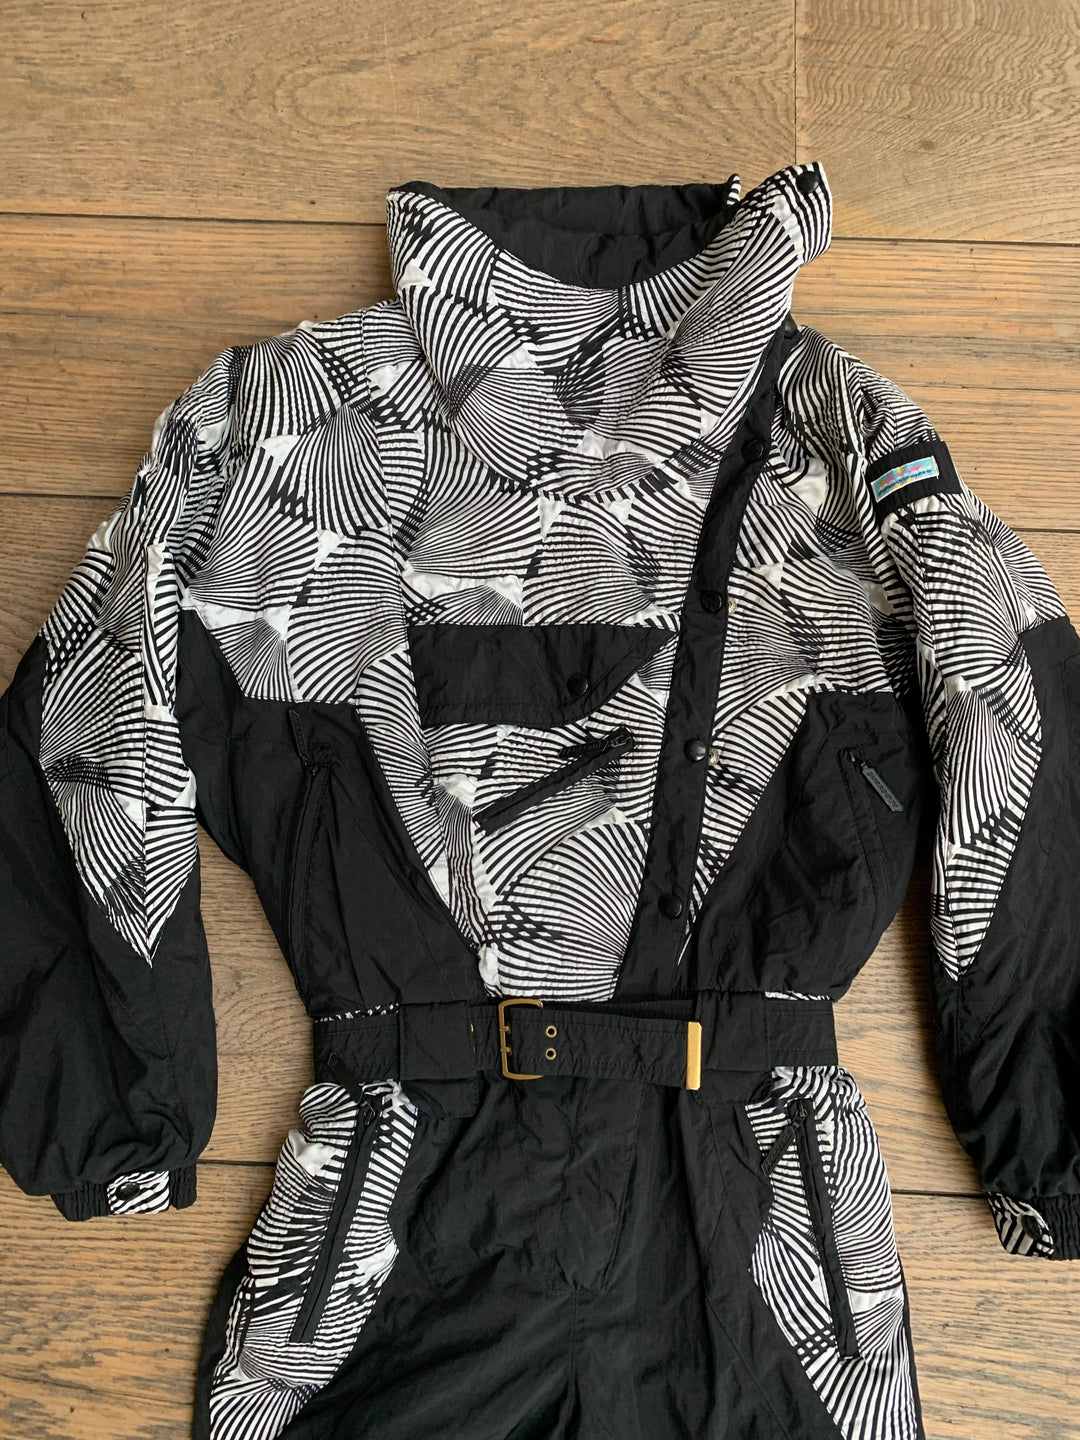 Adult Vintage Mossant all-in-one Ski Suit